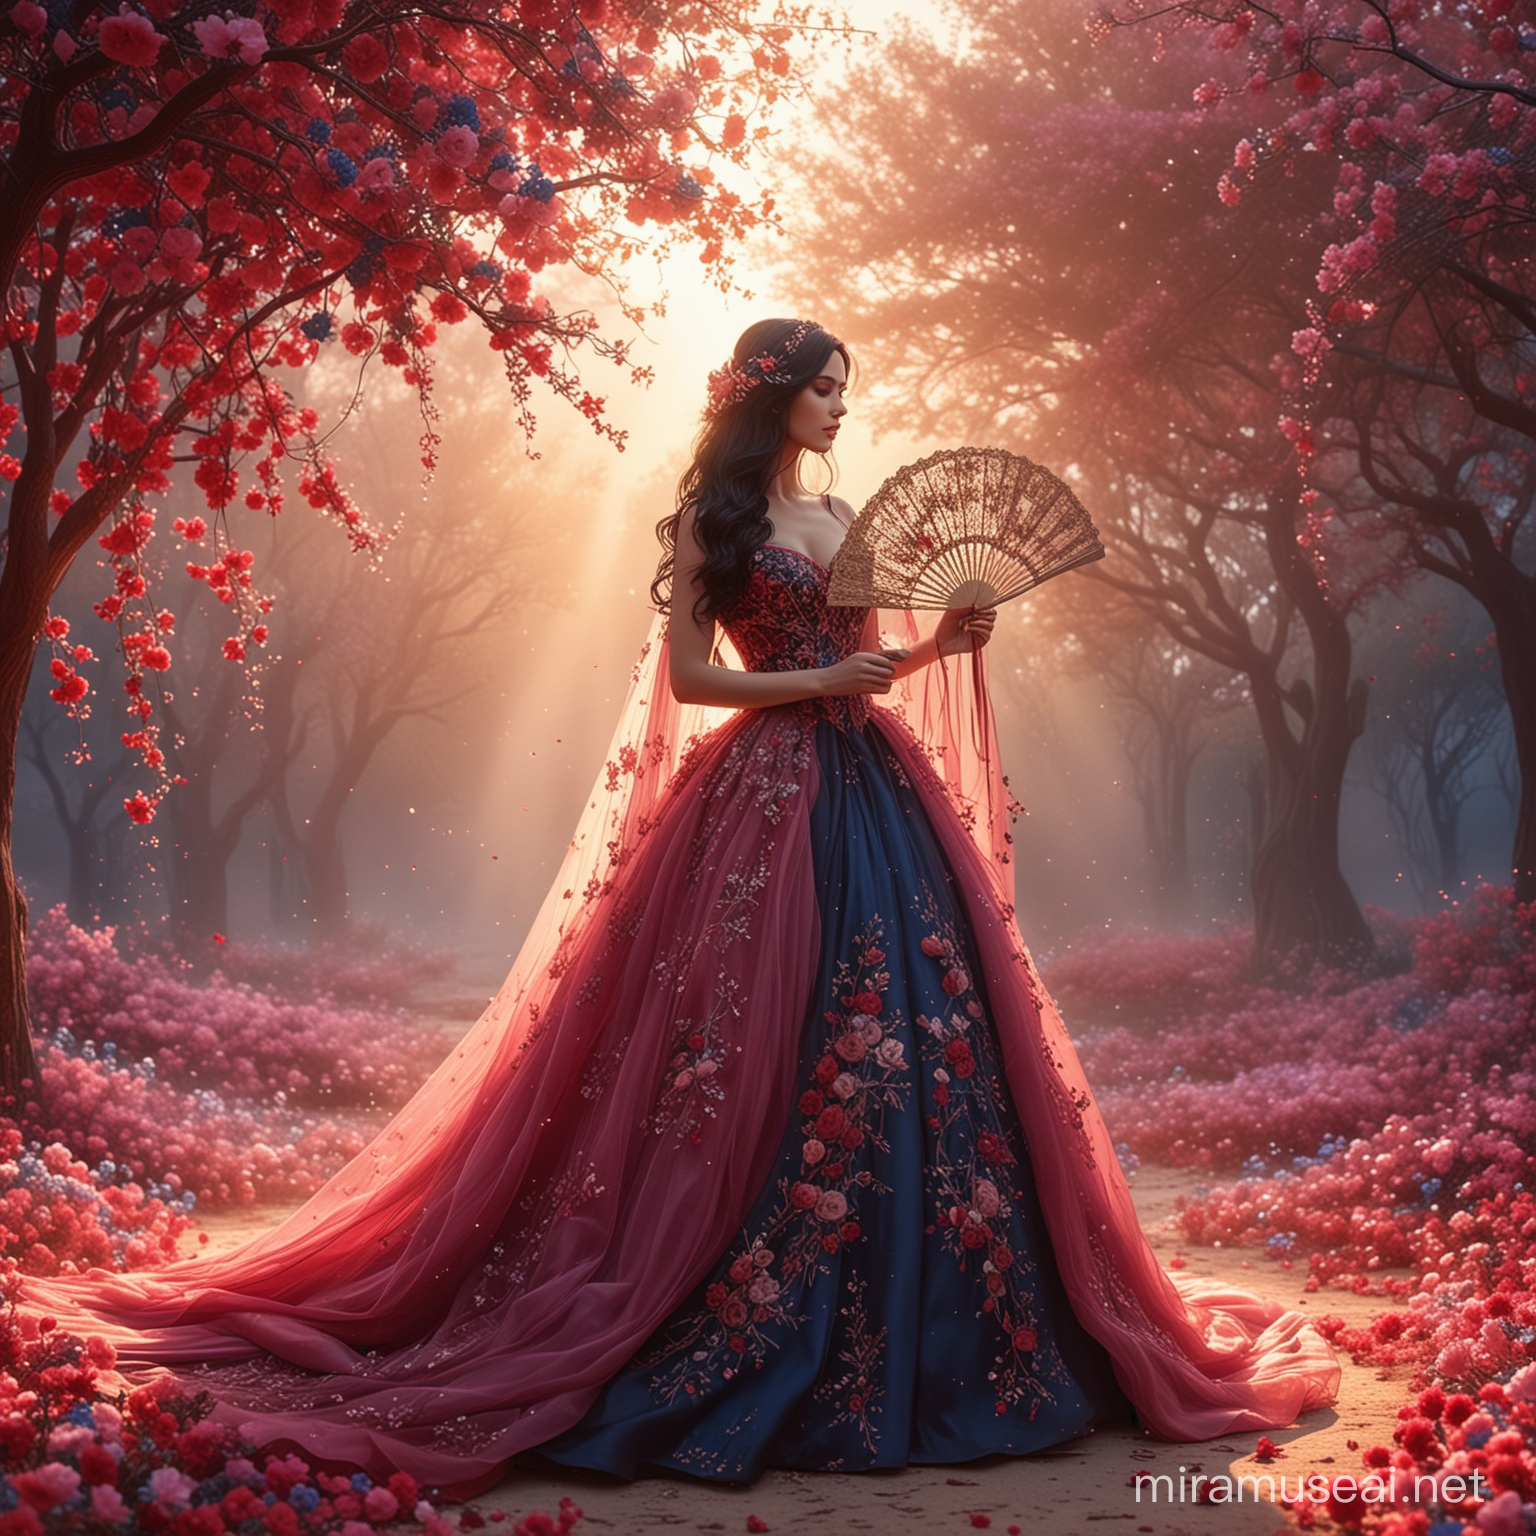 A beautiful woman, holding an elegant fan, standing up under a big floral tree, surrounded by dark pink dust and small dark blue flowers. Long wavy black hair. Elegant long red wedding dress,embroidering bridal veil, haute couture. Background sky with golden light. 8k, fantasy, illustration, digital art, illustration art, fantasy art, fantasy styl